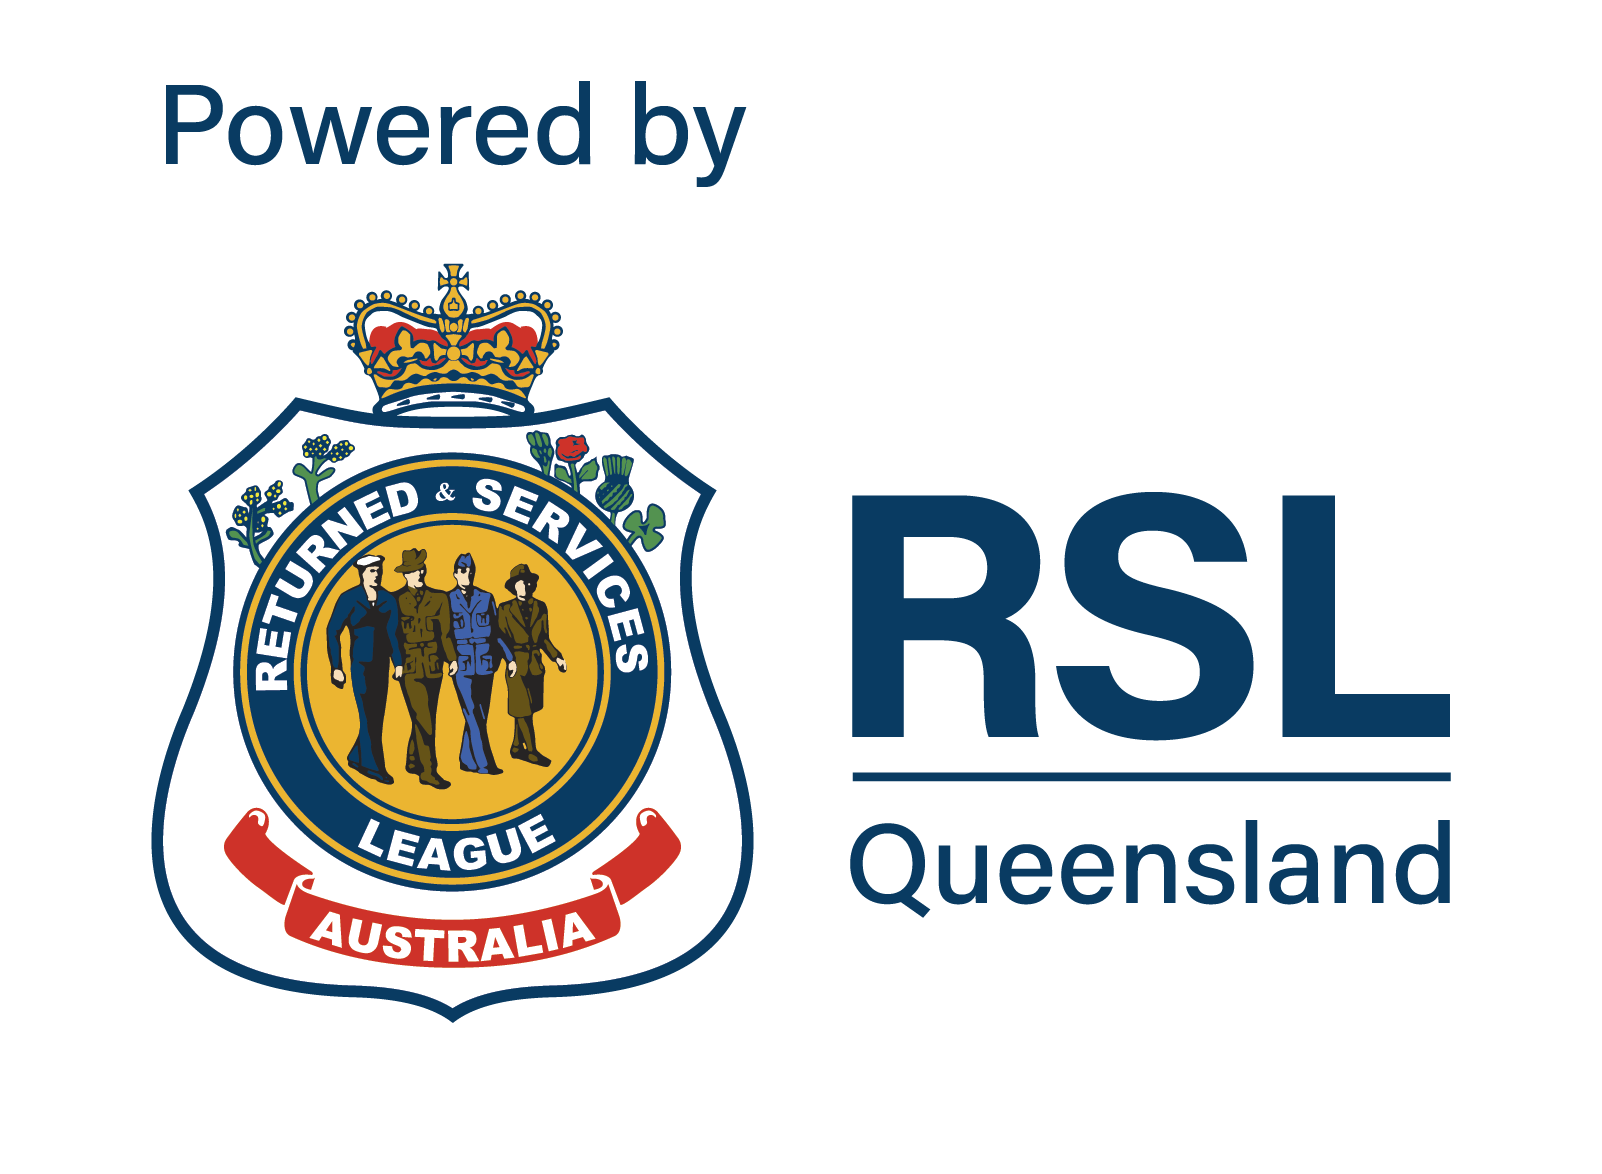 Powered by RSL Queensland logo